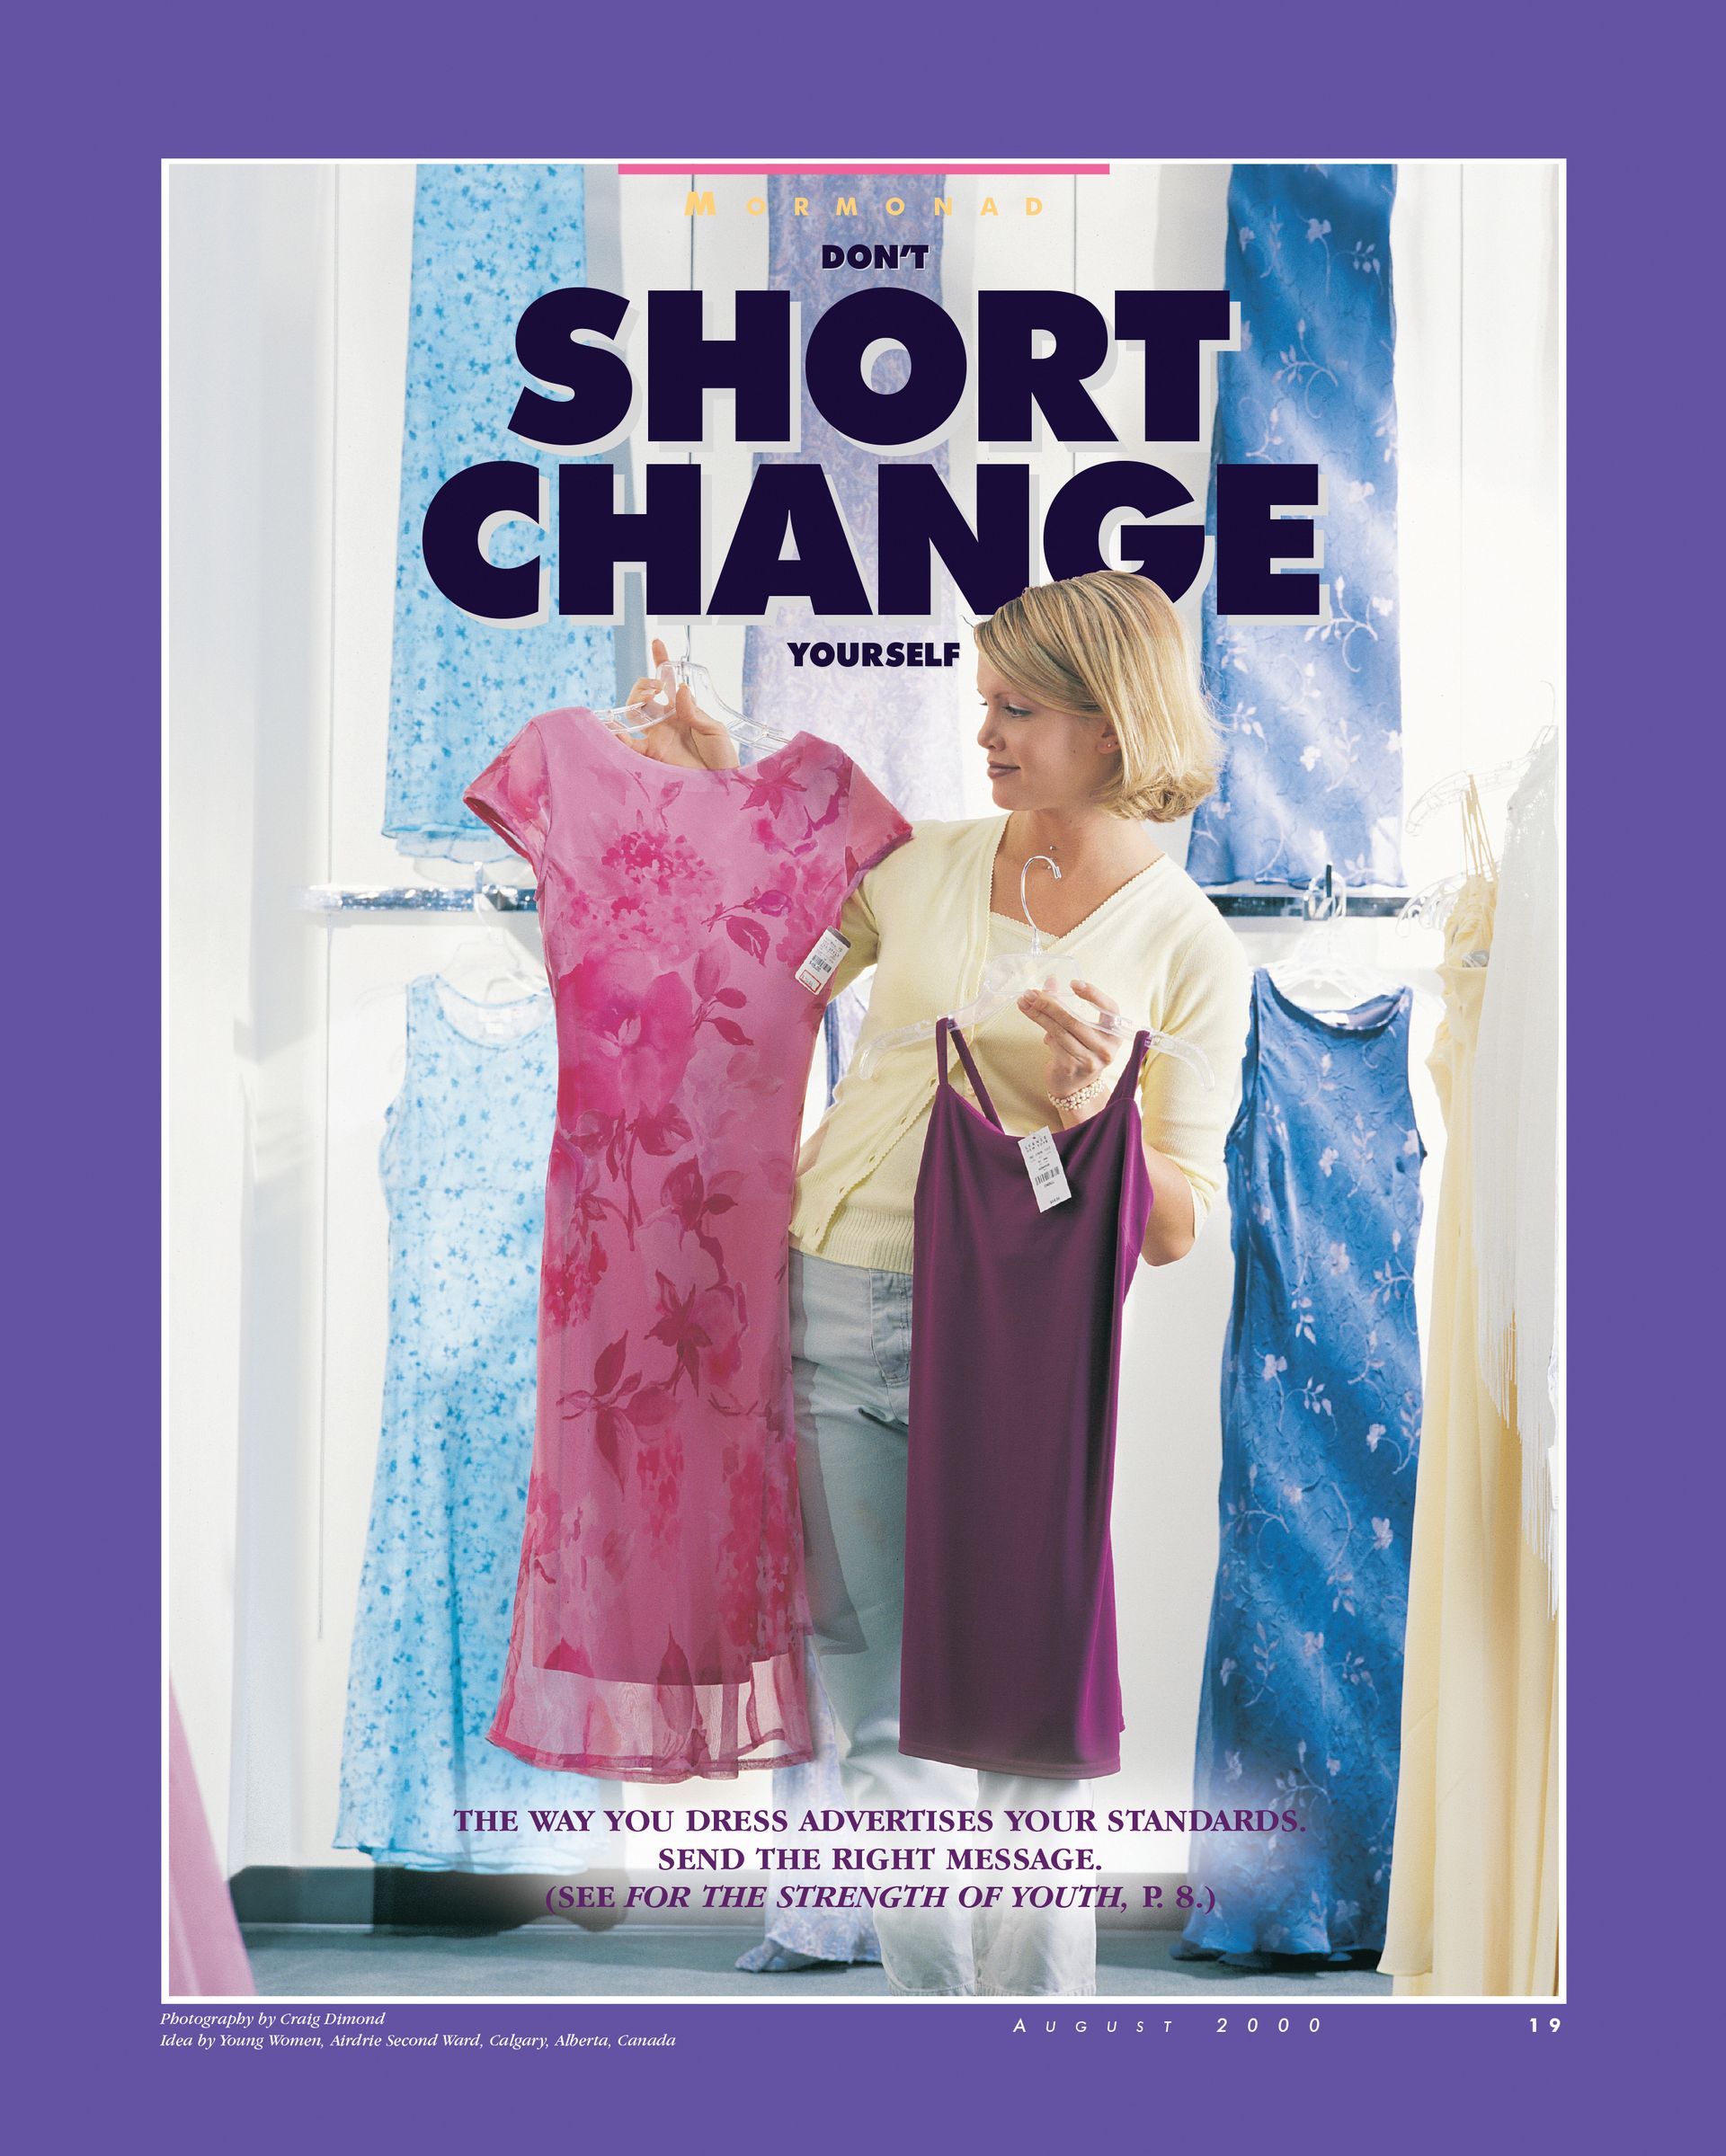 Don't Short Change Yourself. The way you dress advertises your standards. Send the right message. (See For the Strength of Youth, p. 8.) Aug. 2000 © undefined ipCode 1.